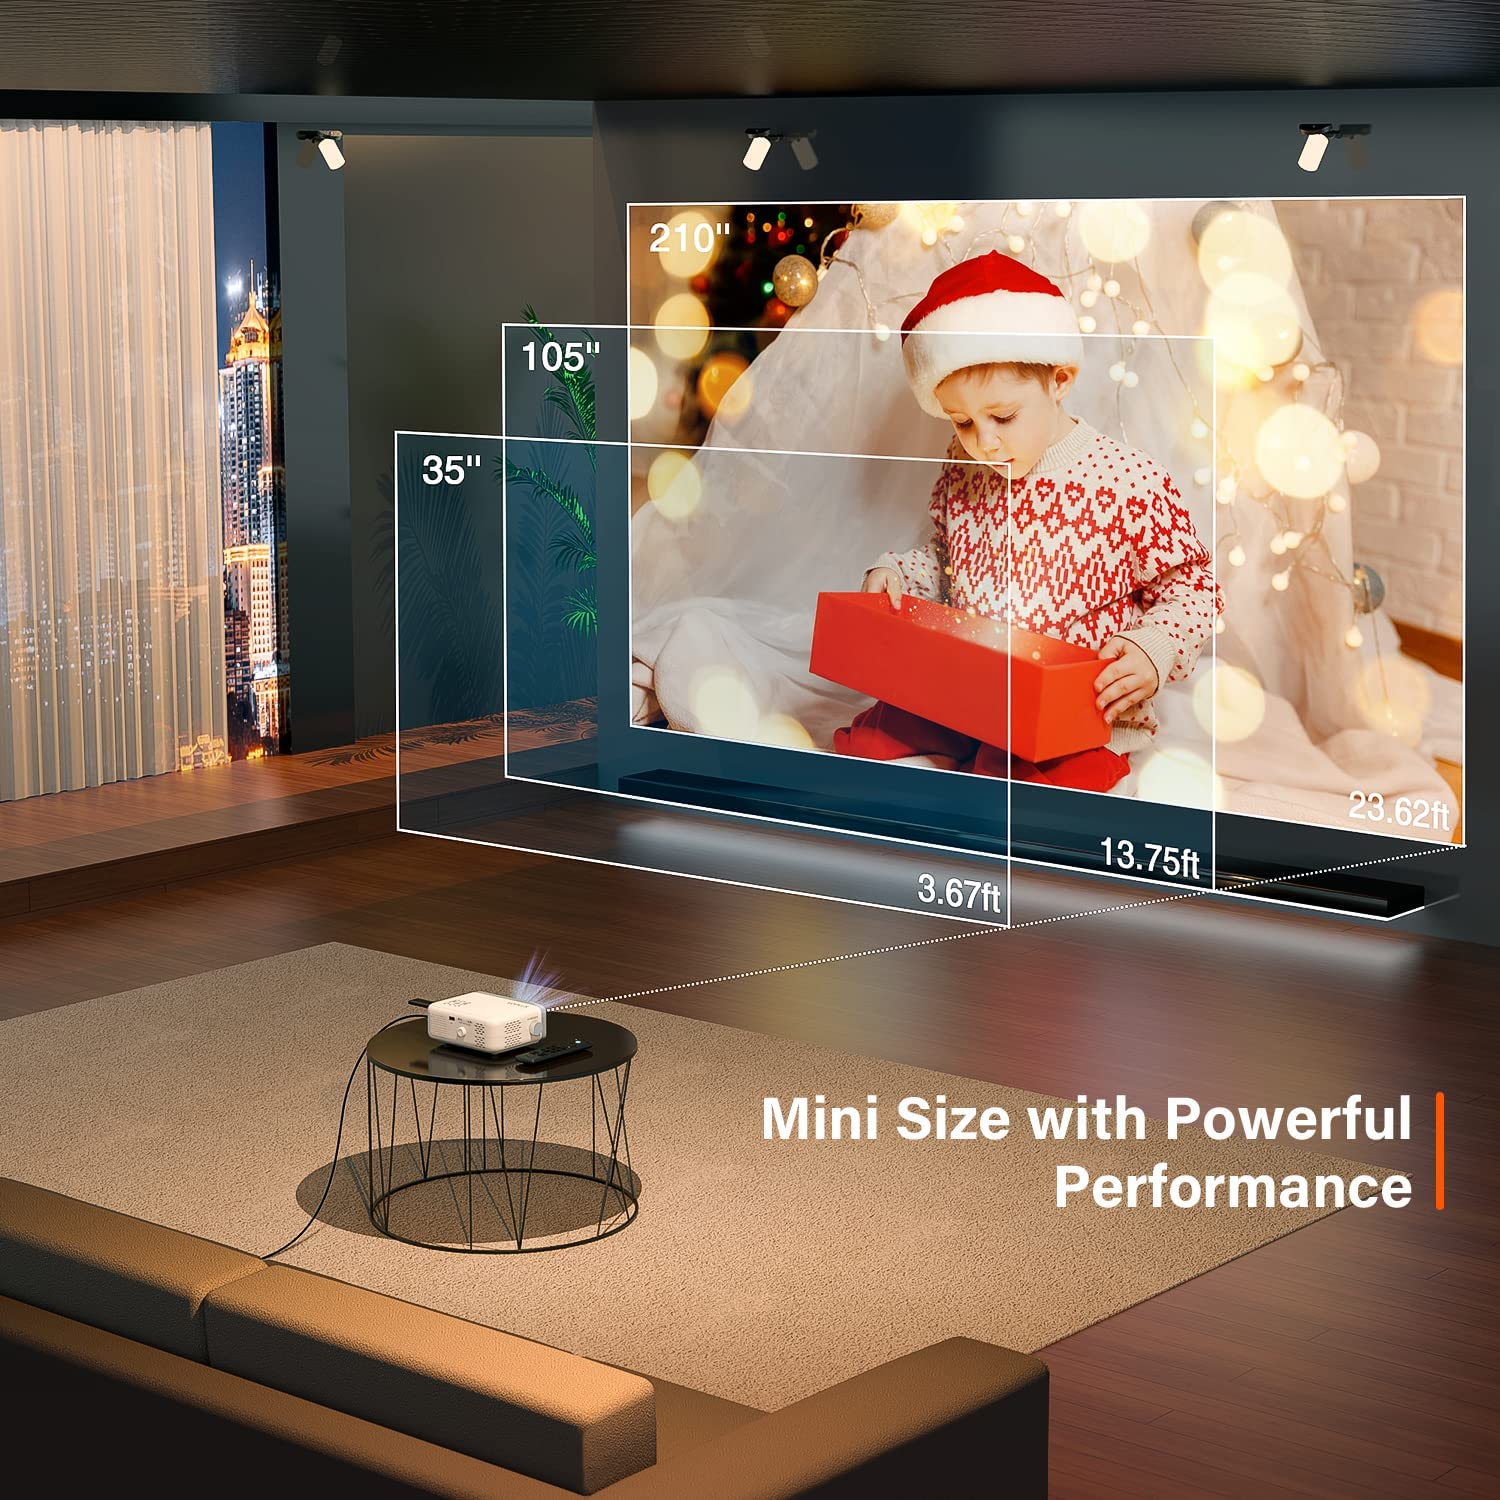 VOPLLS Vision: The Compact, High-Definition Projector